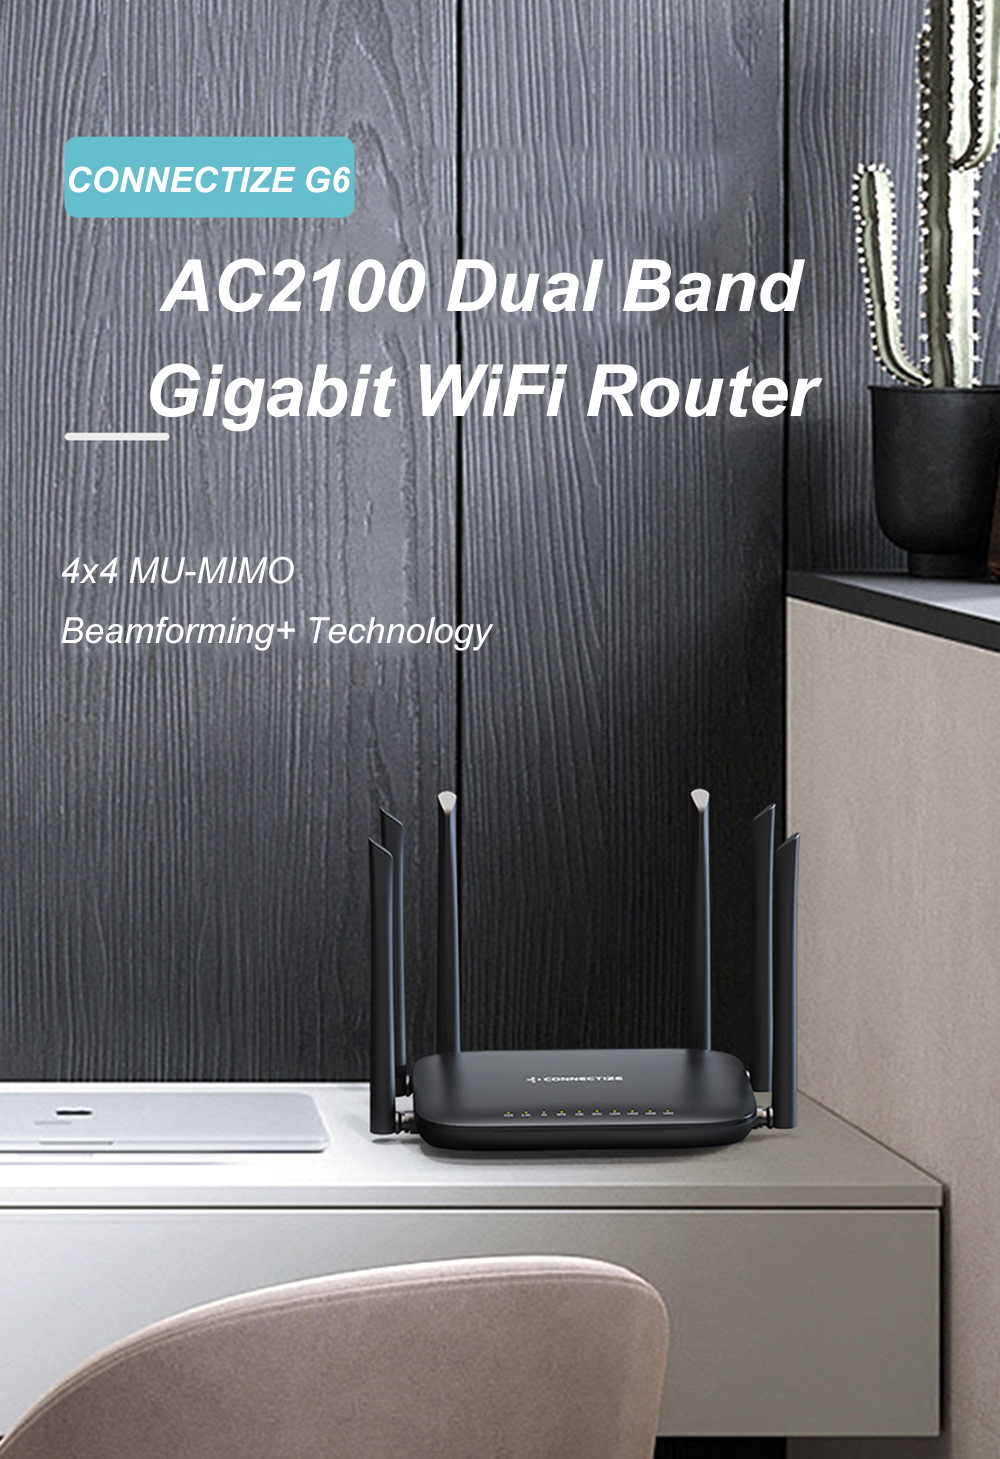 CONNECTIZE-AC2100-Wireless-Router-Dual-Band-24G5G-Gigabit-WiFi-Router-USEU-Plug-Support-MU-MIMO-Beam-1955383-1